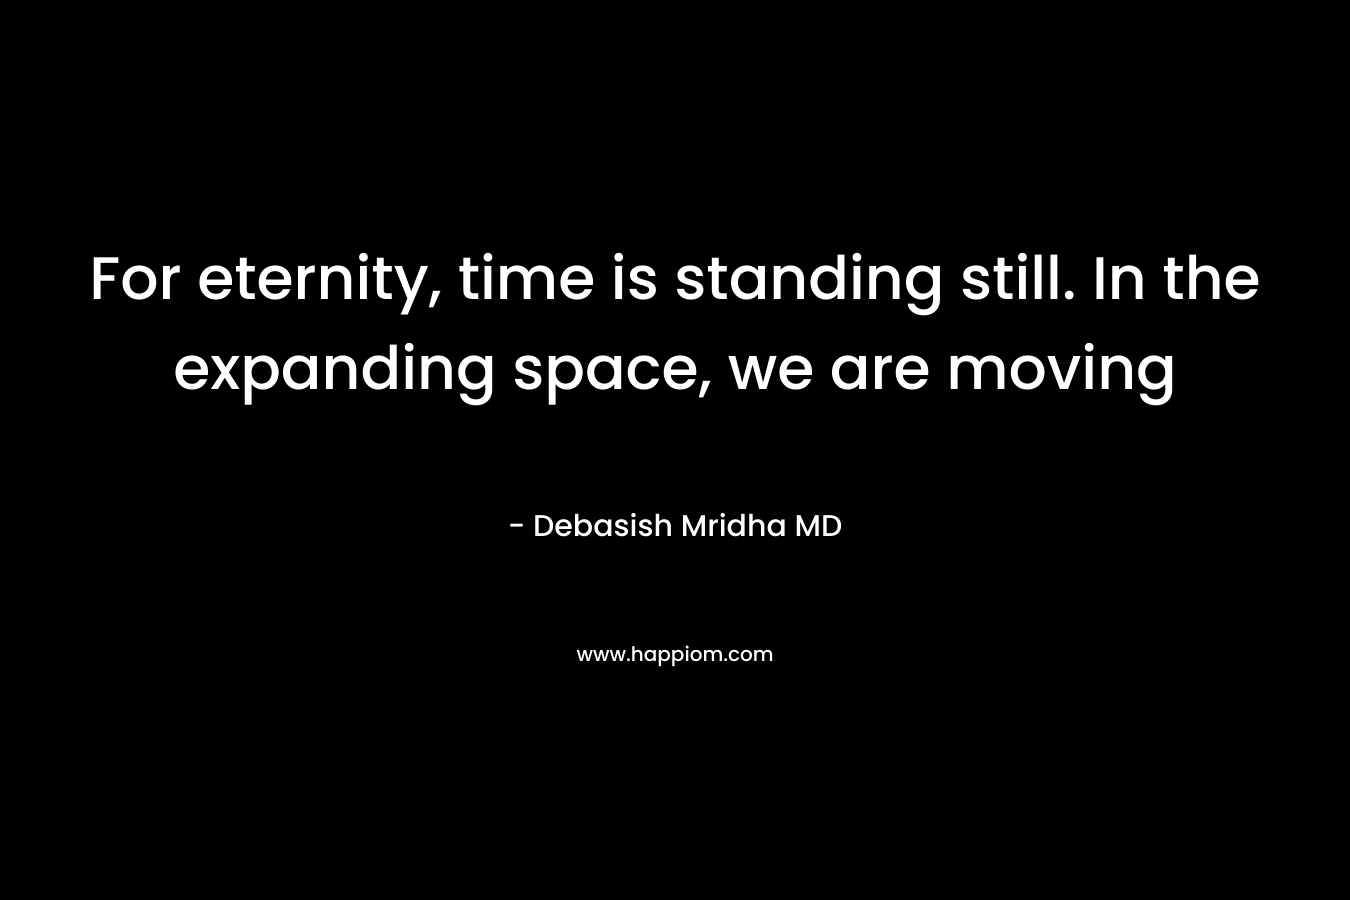 For eternity, time is standing still. In the expanding space, we are moving